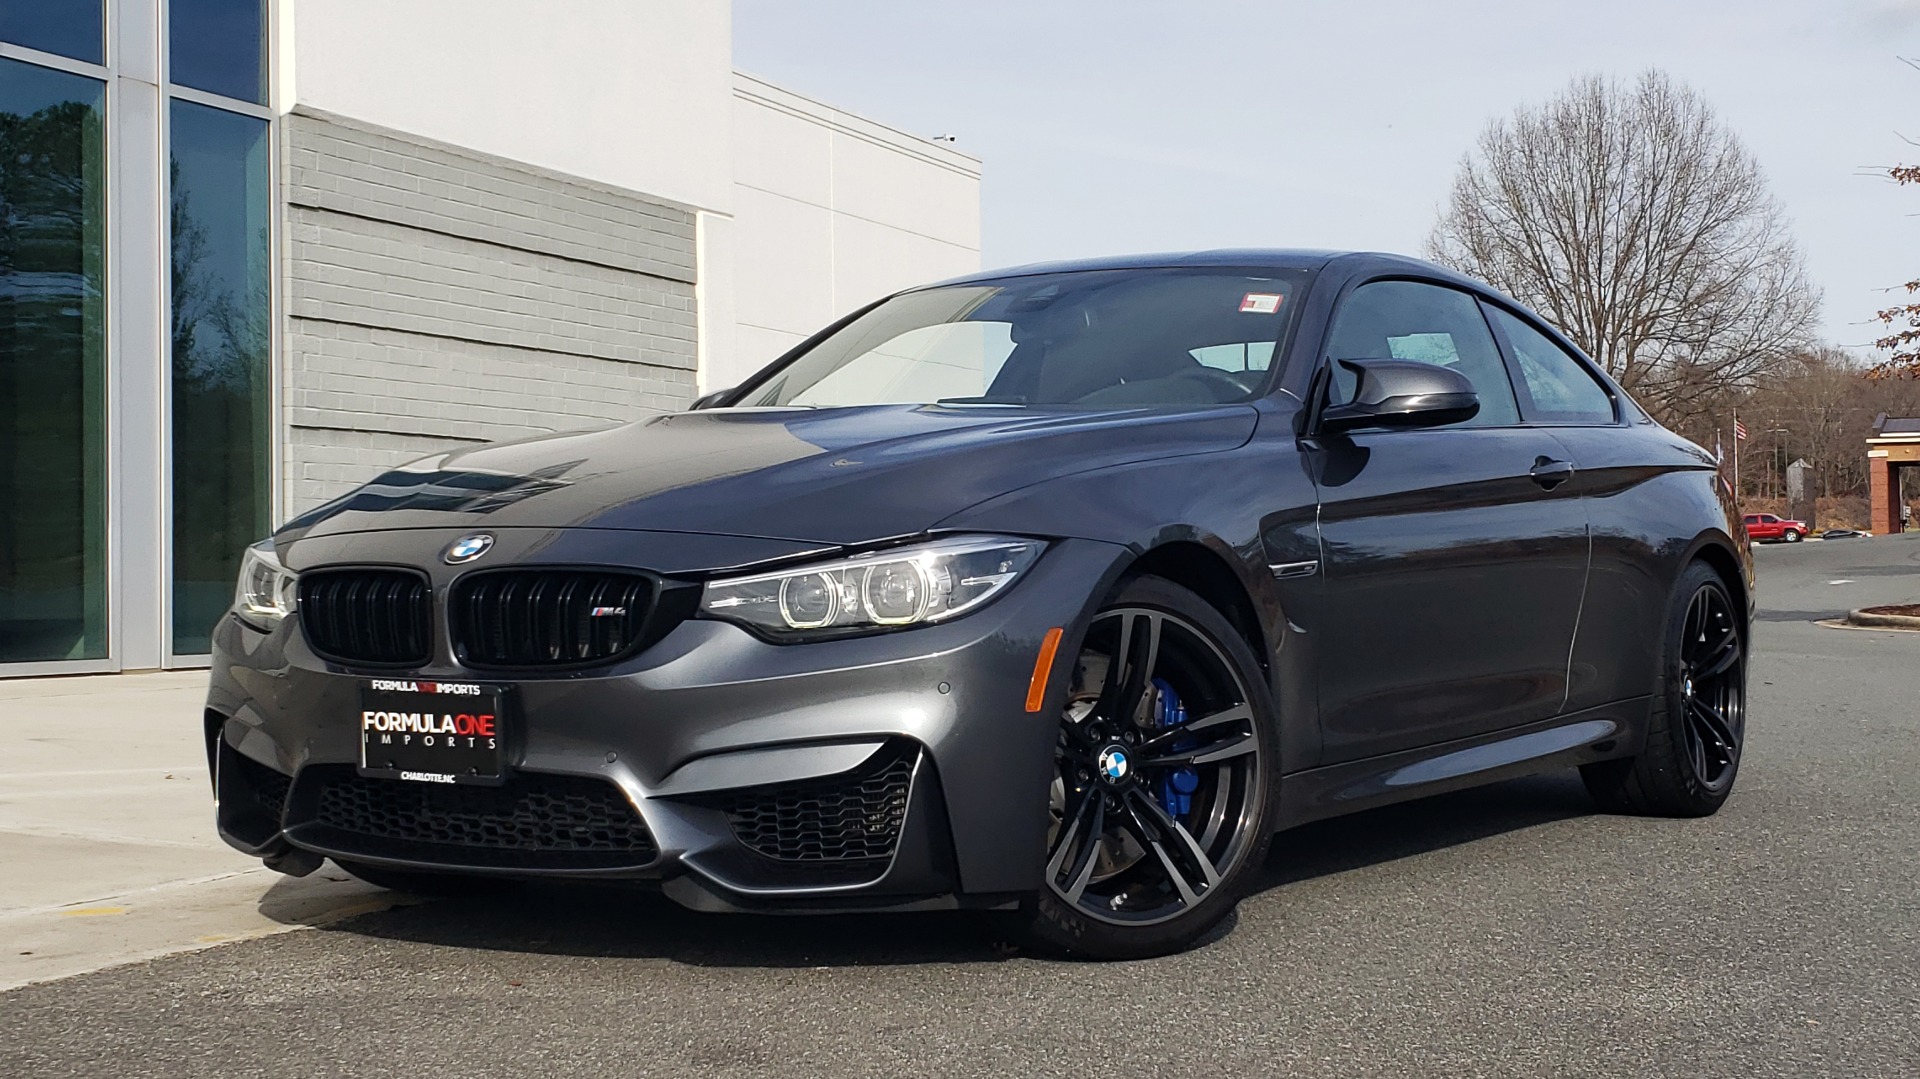 Used 2019 BMW M4 COUPE 3.0L 425HP / 7-SPD AUTO / NAV / 19-IN WHEELS / REARVIEW for sale $67,999 at Formula Imports in Charlotte NC 28227 2